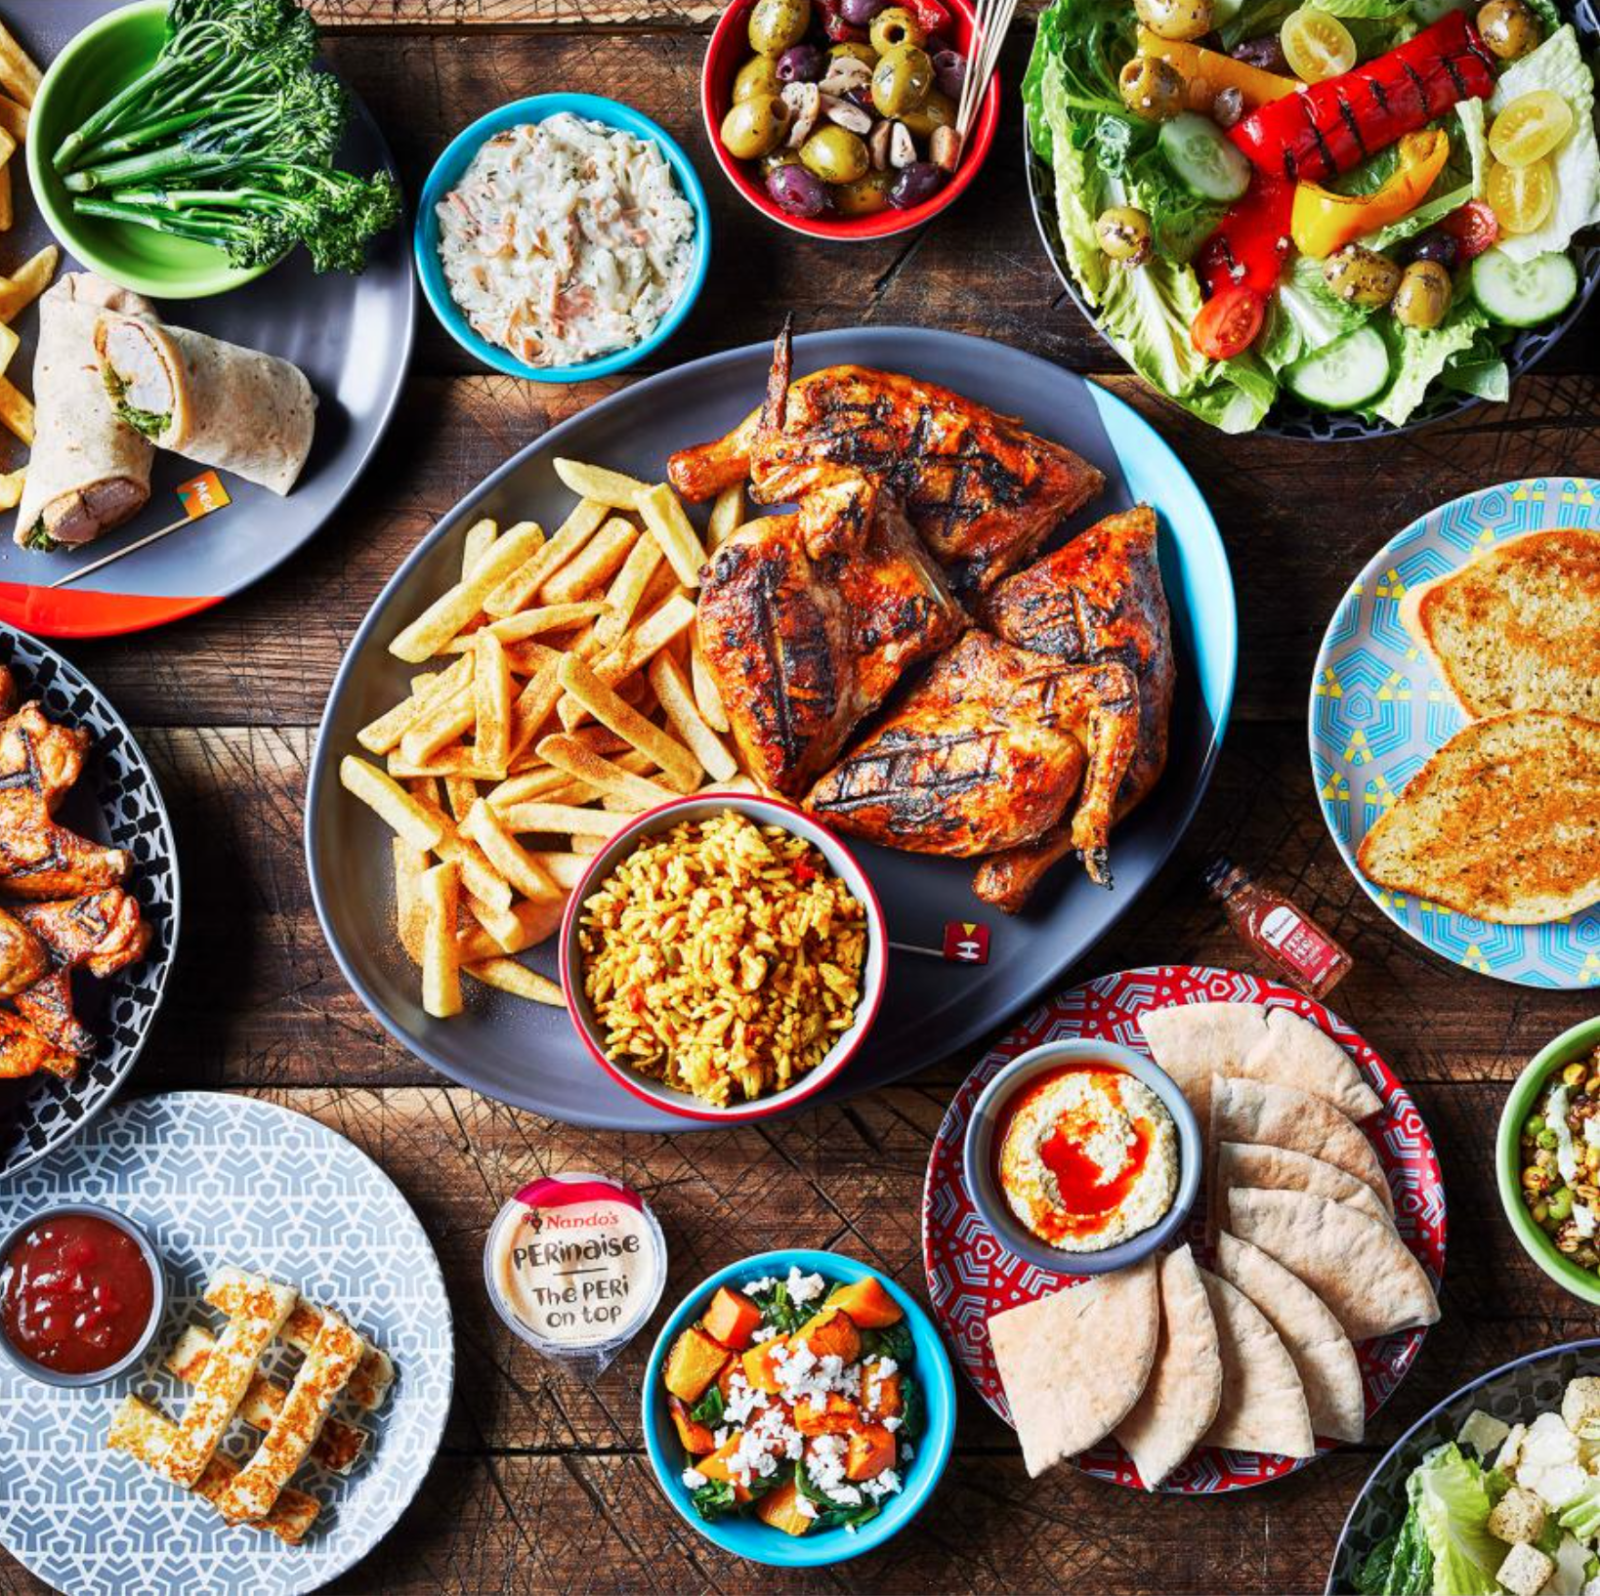 A selection of food from Nando's.